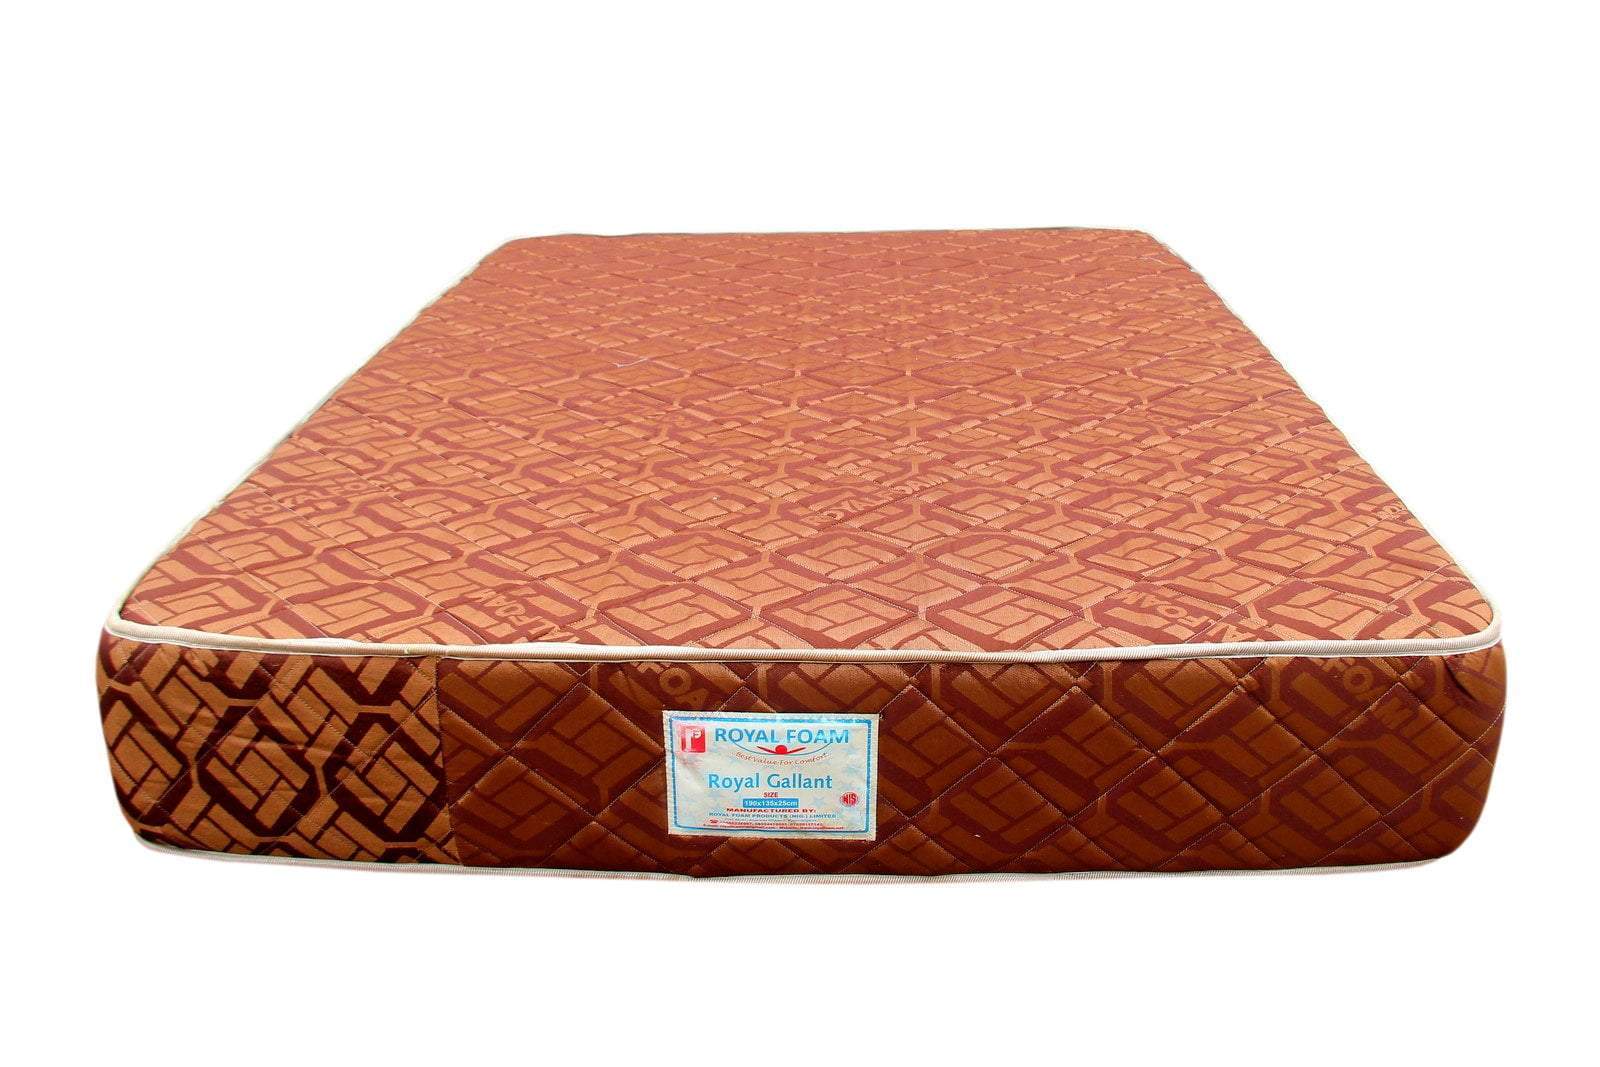 Royal Gallant JACQUARD fabric-Fully Quilted Mattress 190 X 91 X 15 CM(6ft x 3ft x 6inches)(Lagos Only)